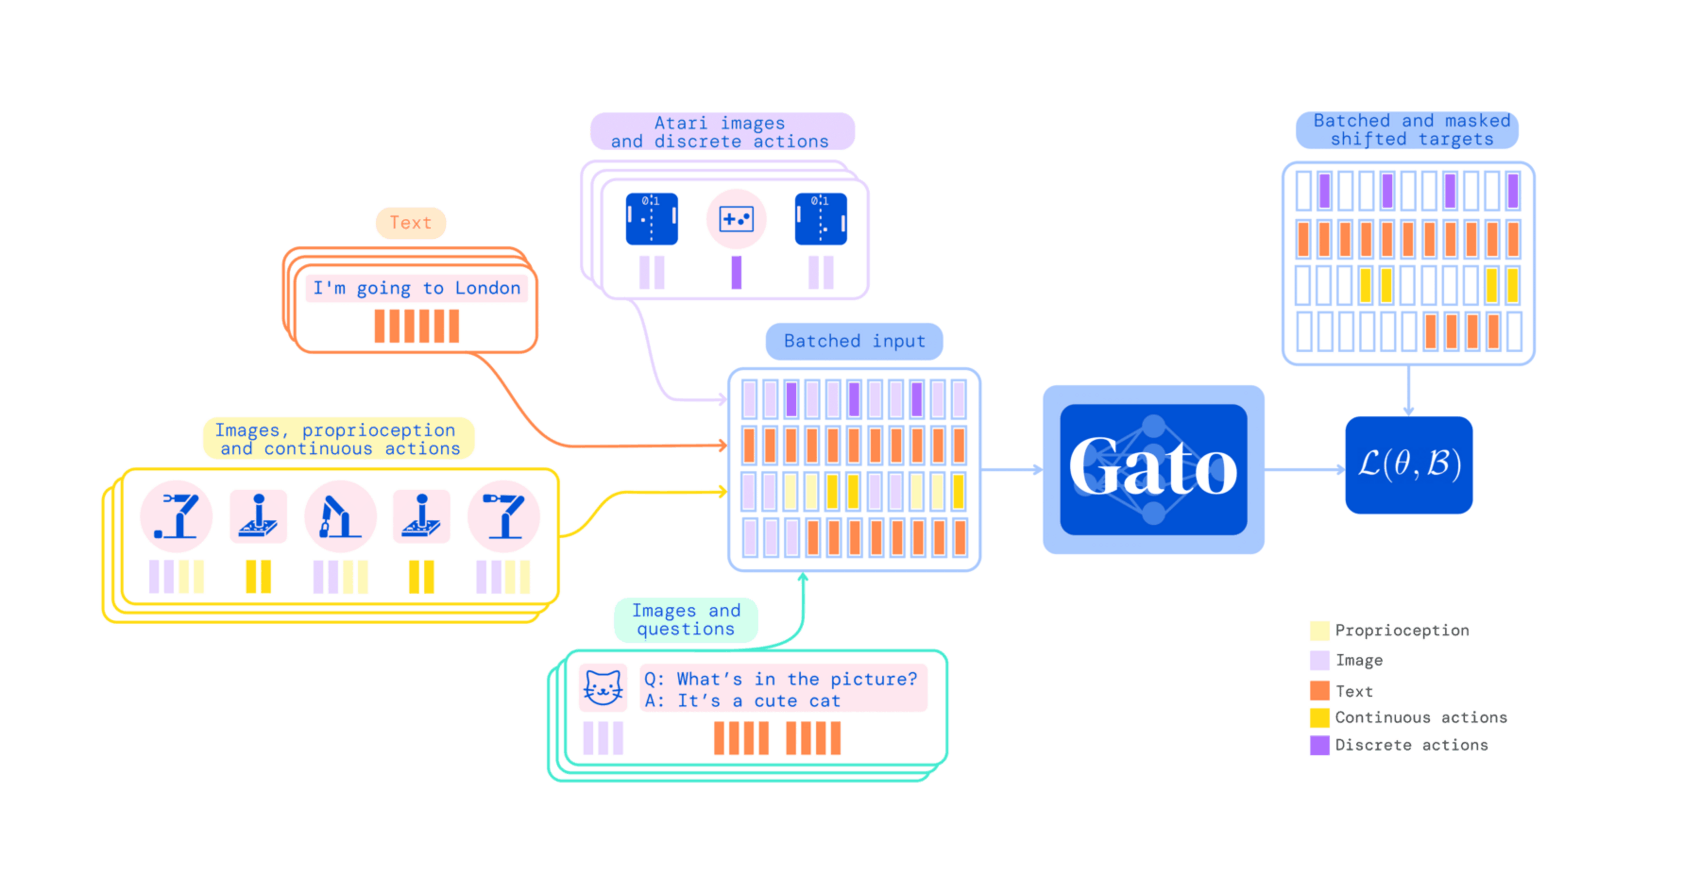 Figure 2: Training phase of Gato. Data from different tasks and modalities is serialized into a flat sequence of tokens, batched, and processed by a transformer neural network akin to a large language model. Masking is used such that the loss function is applied only to target outputs, i.e. text and various actions.